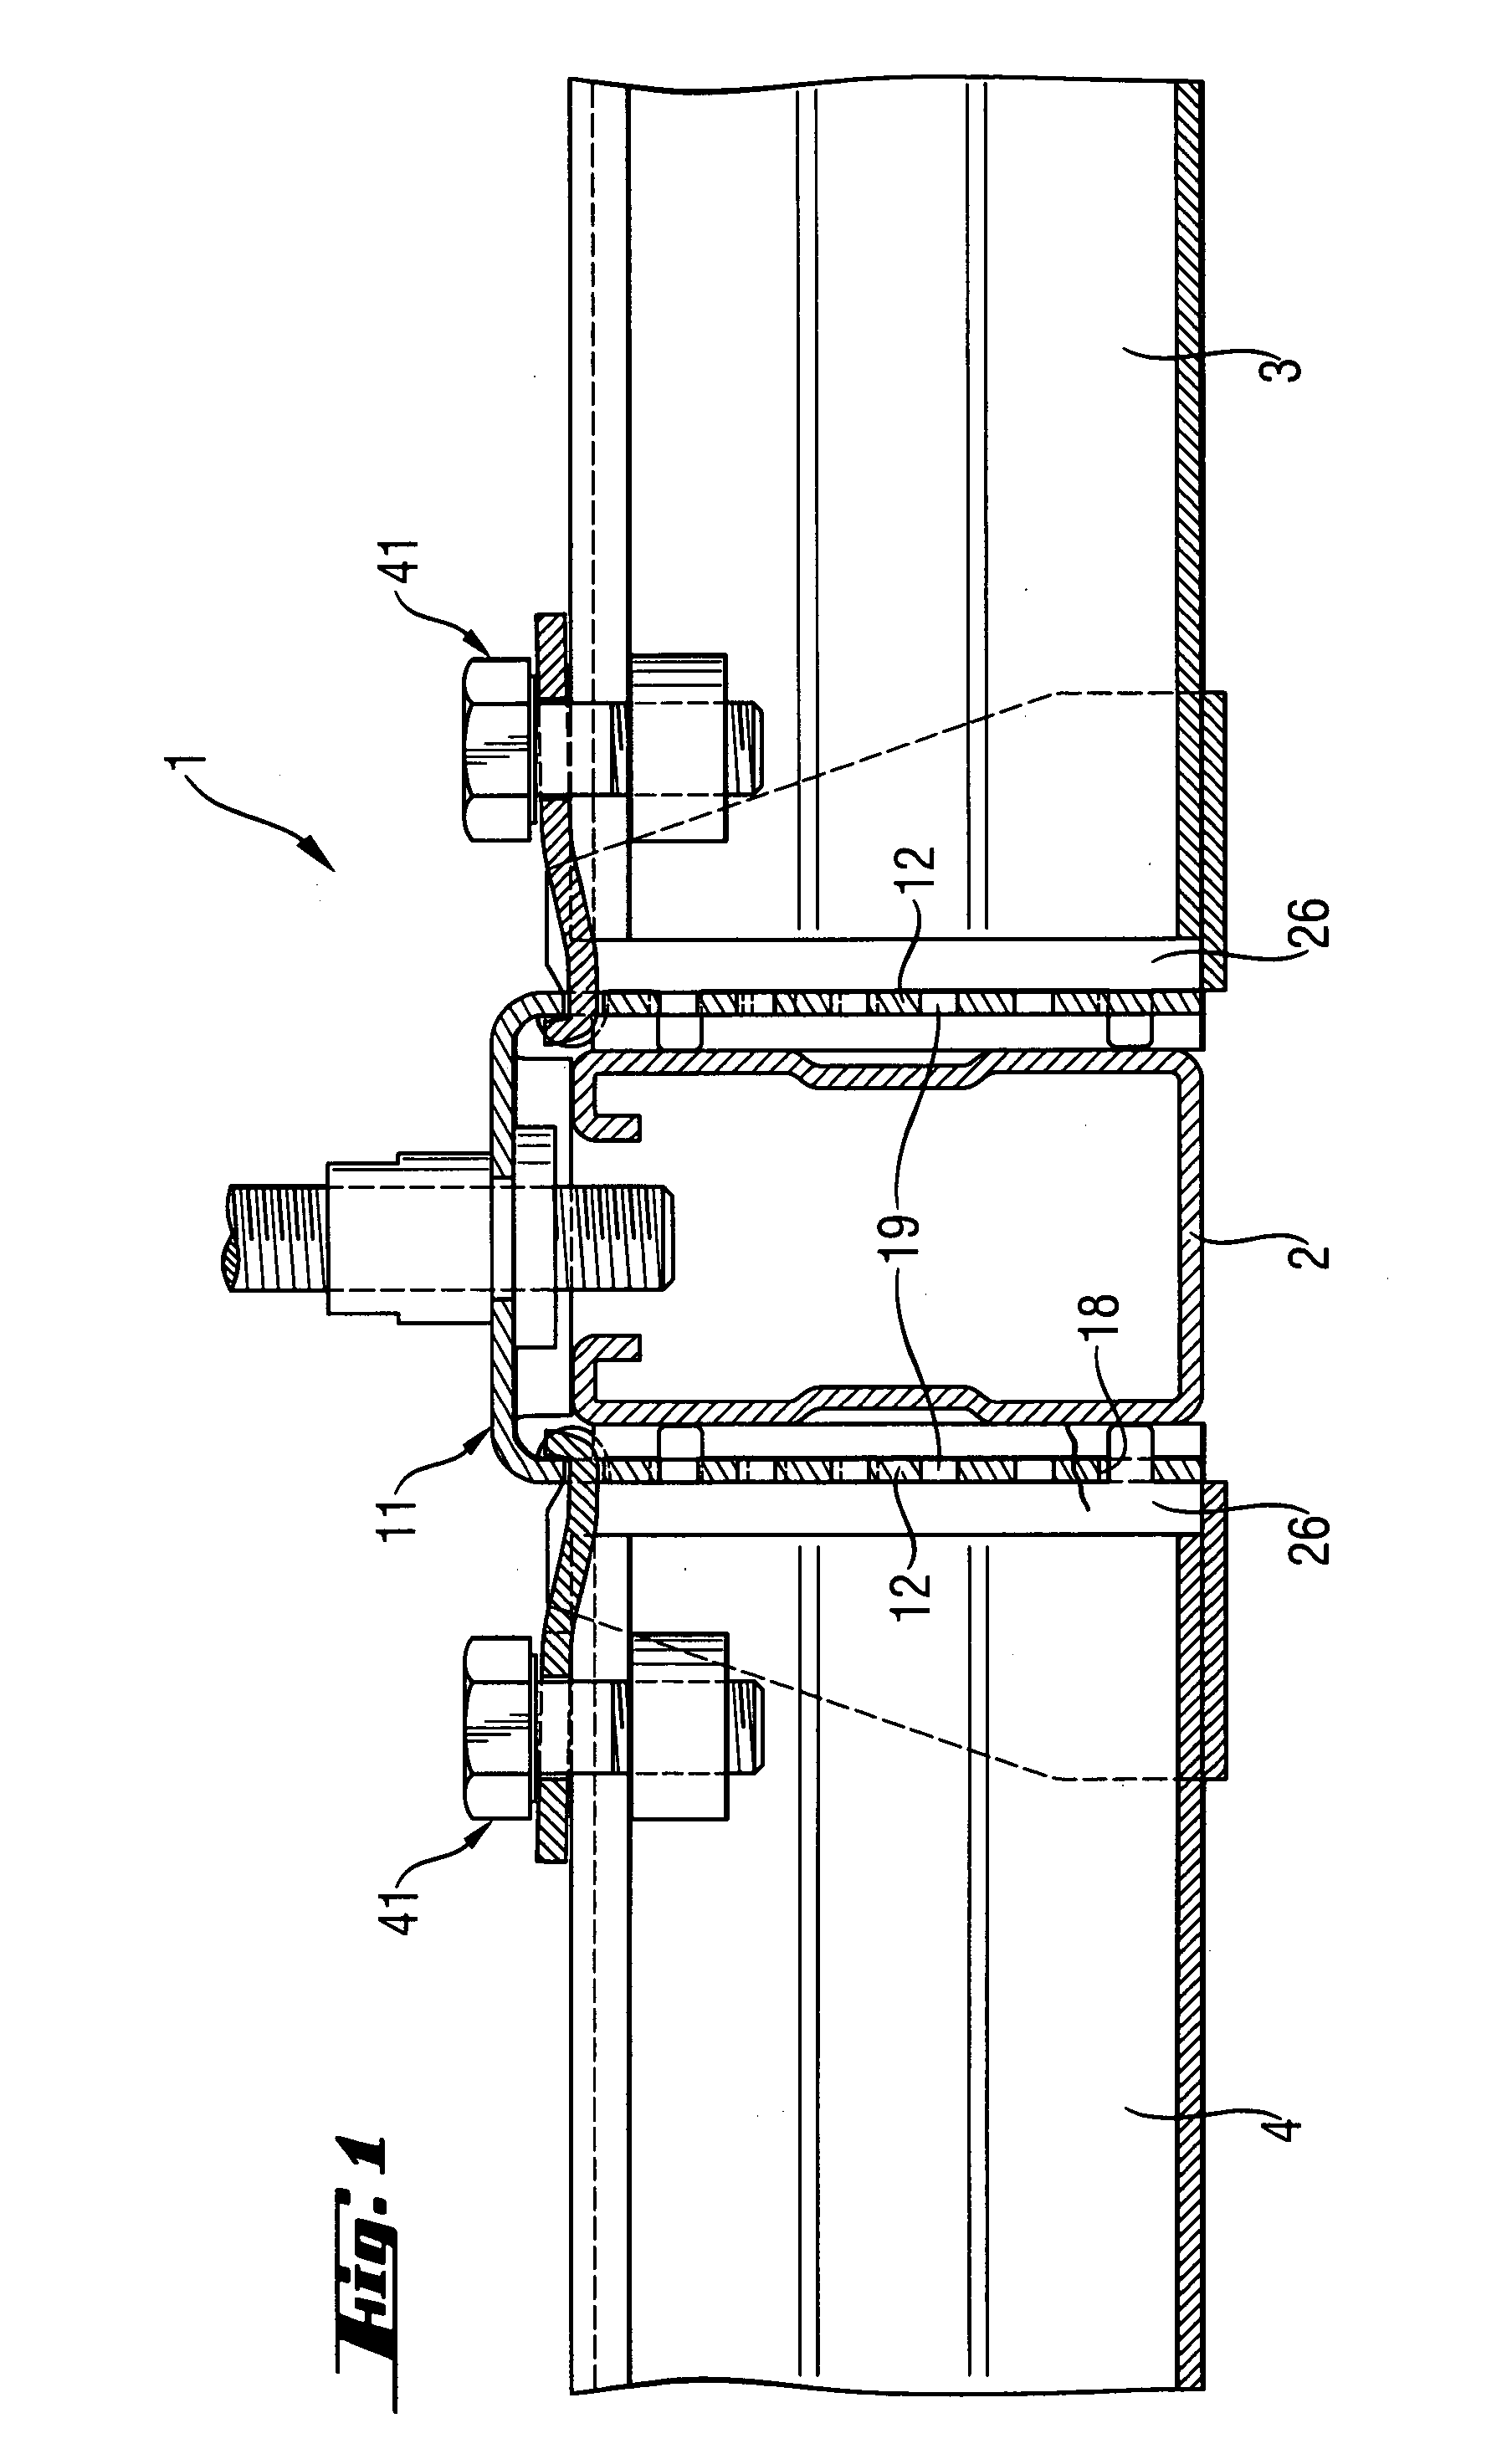 Connection device for connecting mounting rails